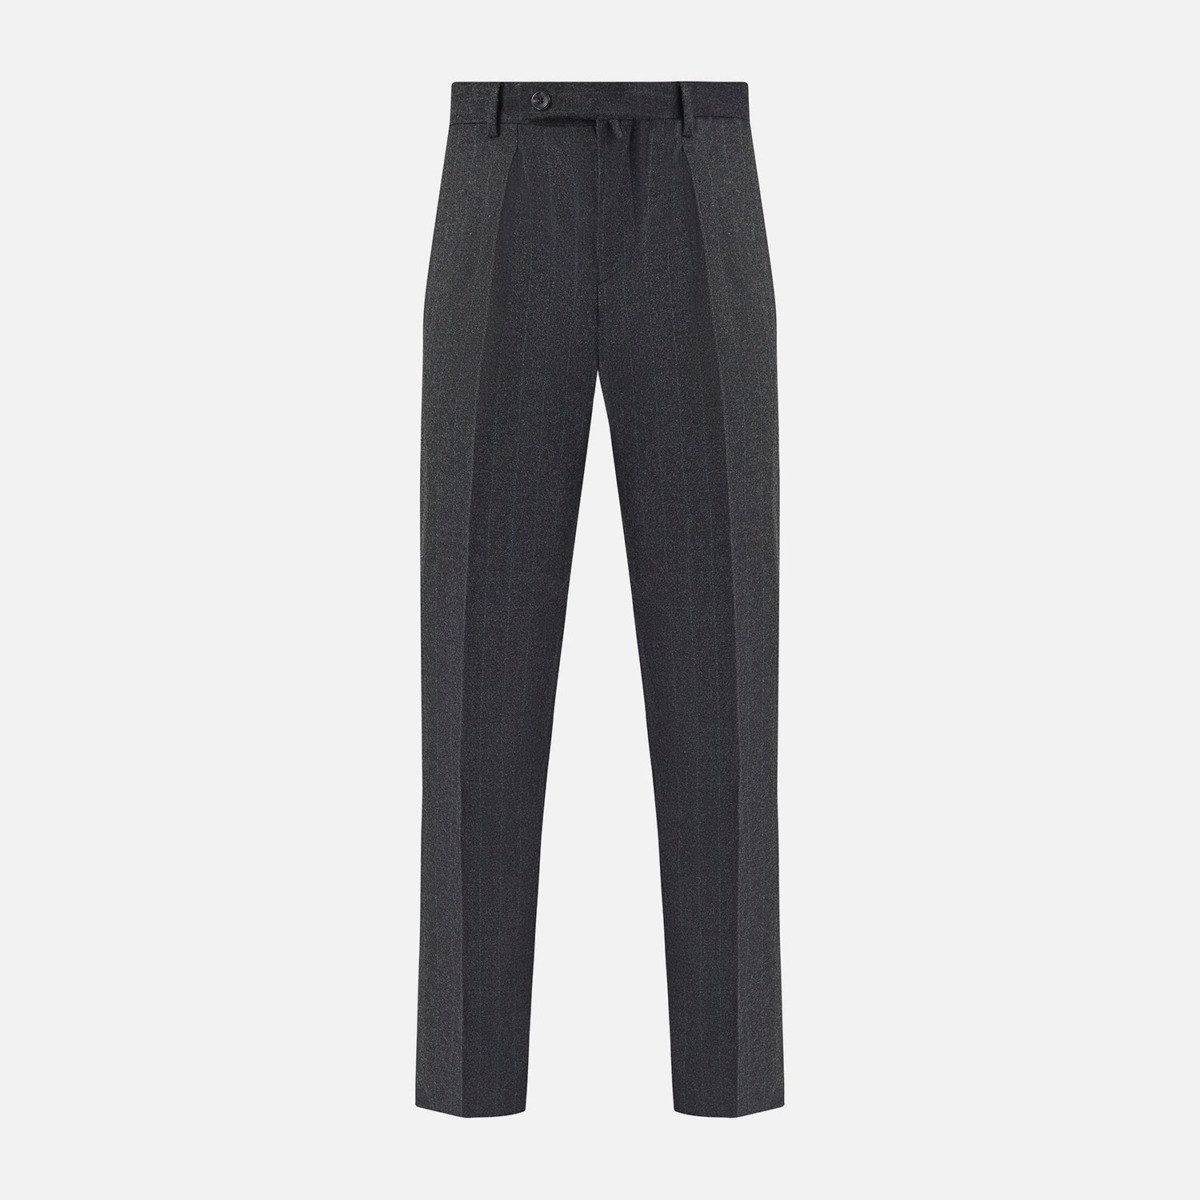 Turnbull & Asser - Man Trousers in Grey Turnbull And Asser GOOFASH